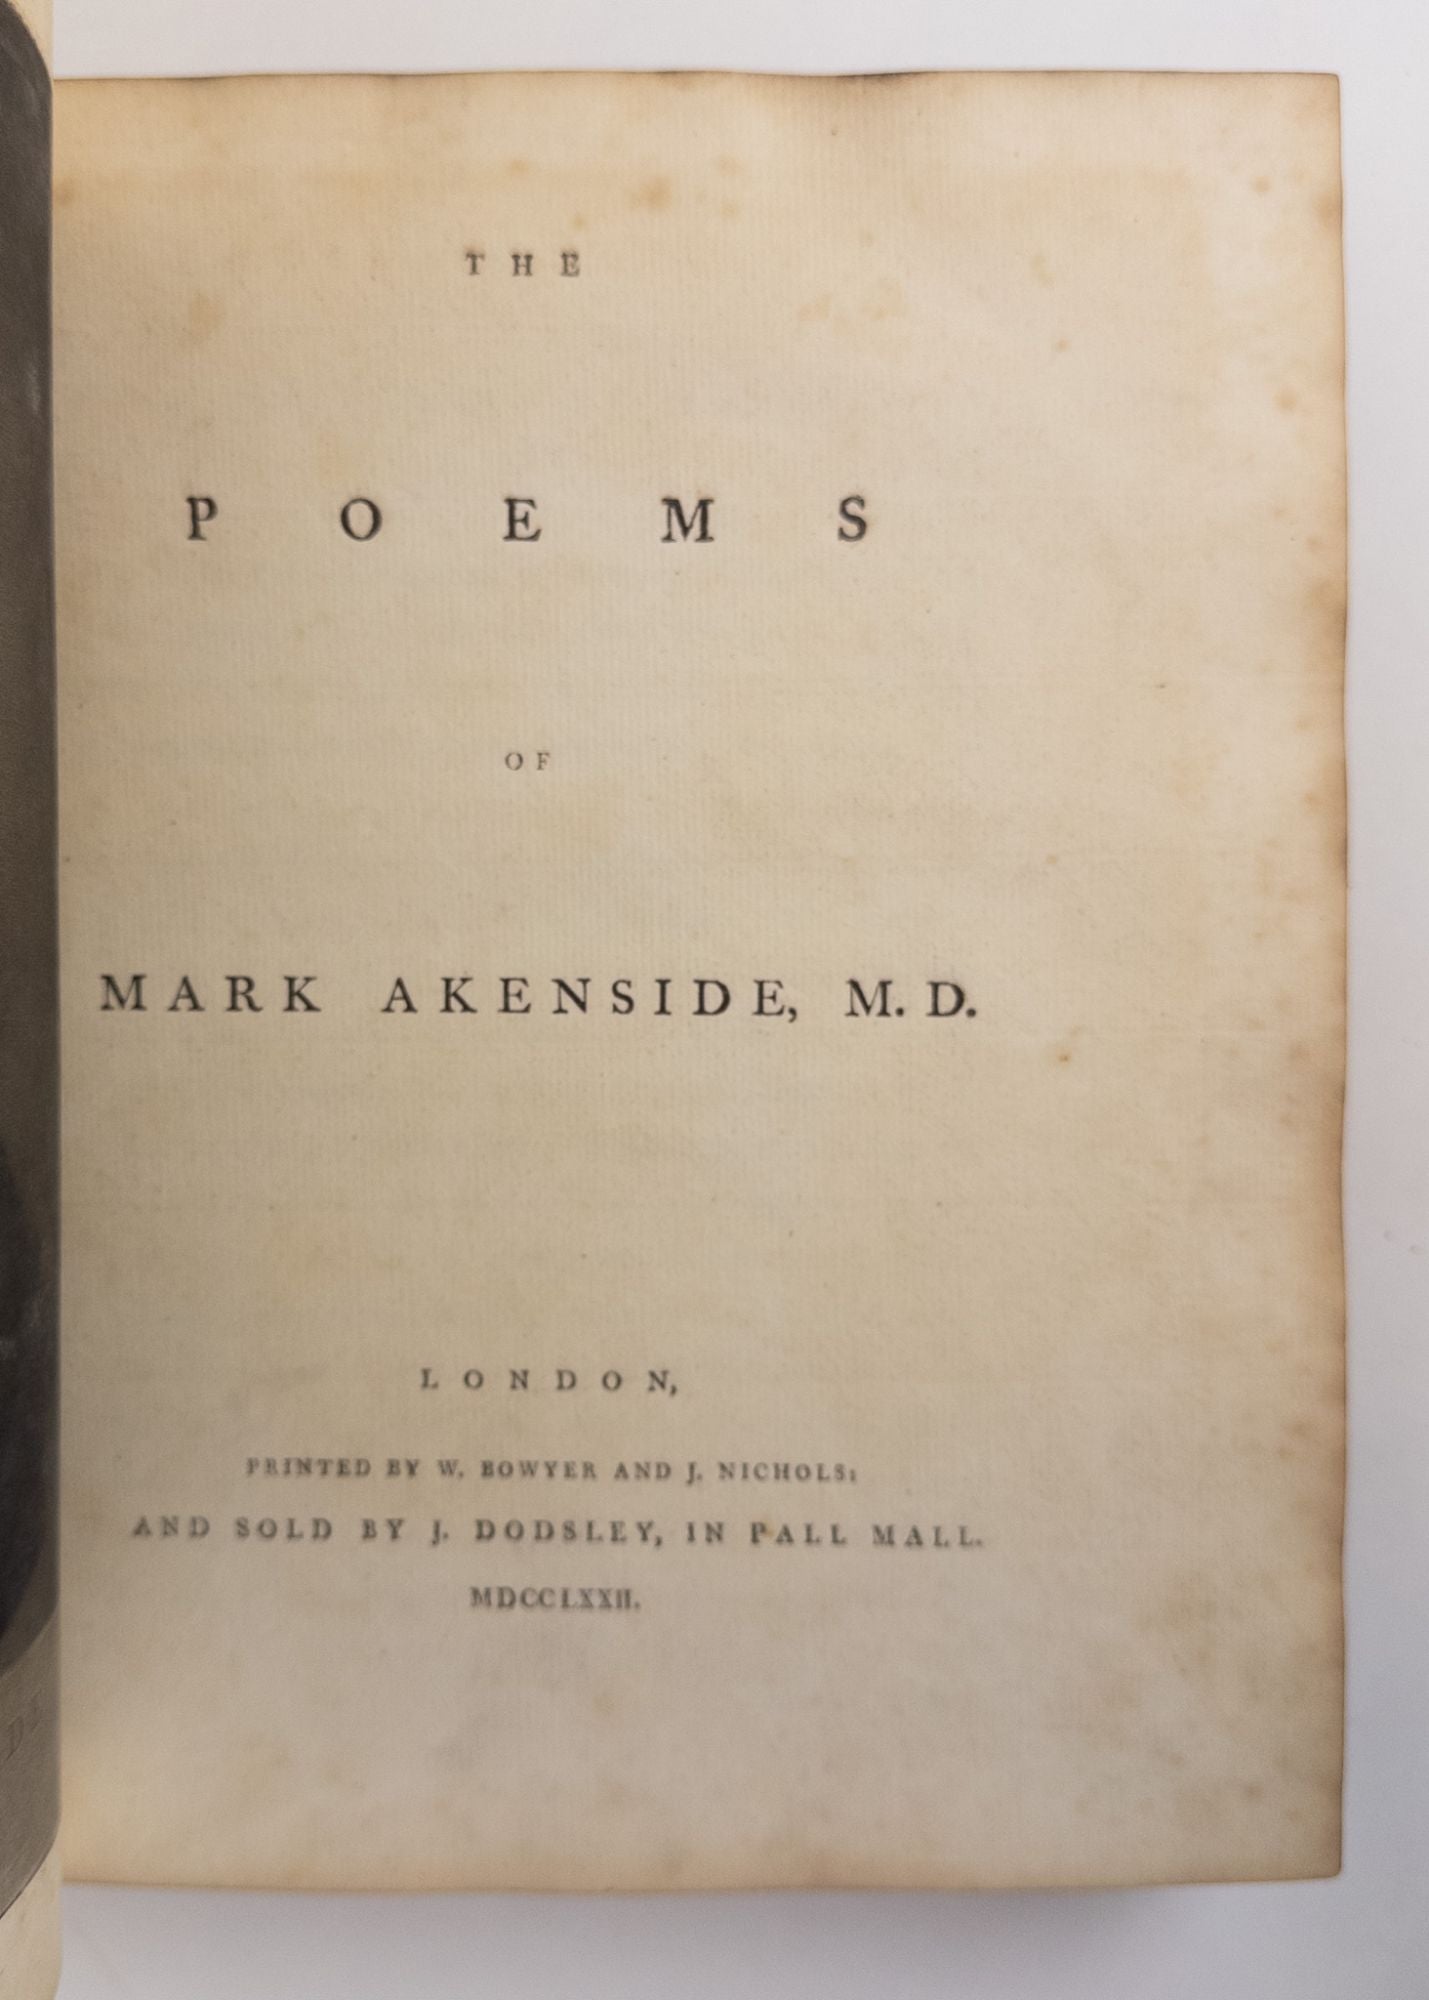 Product Image for THE POEMS OF MARK AKENSIDE, M.D.